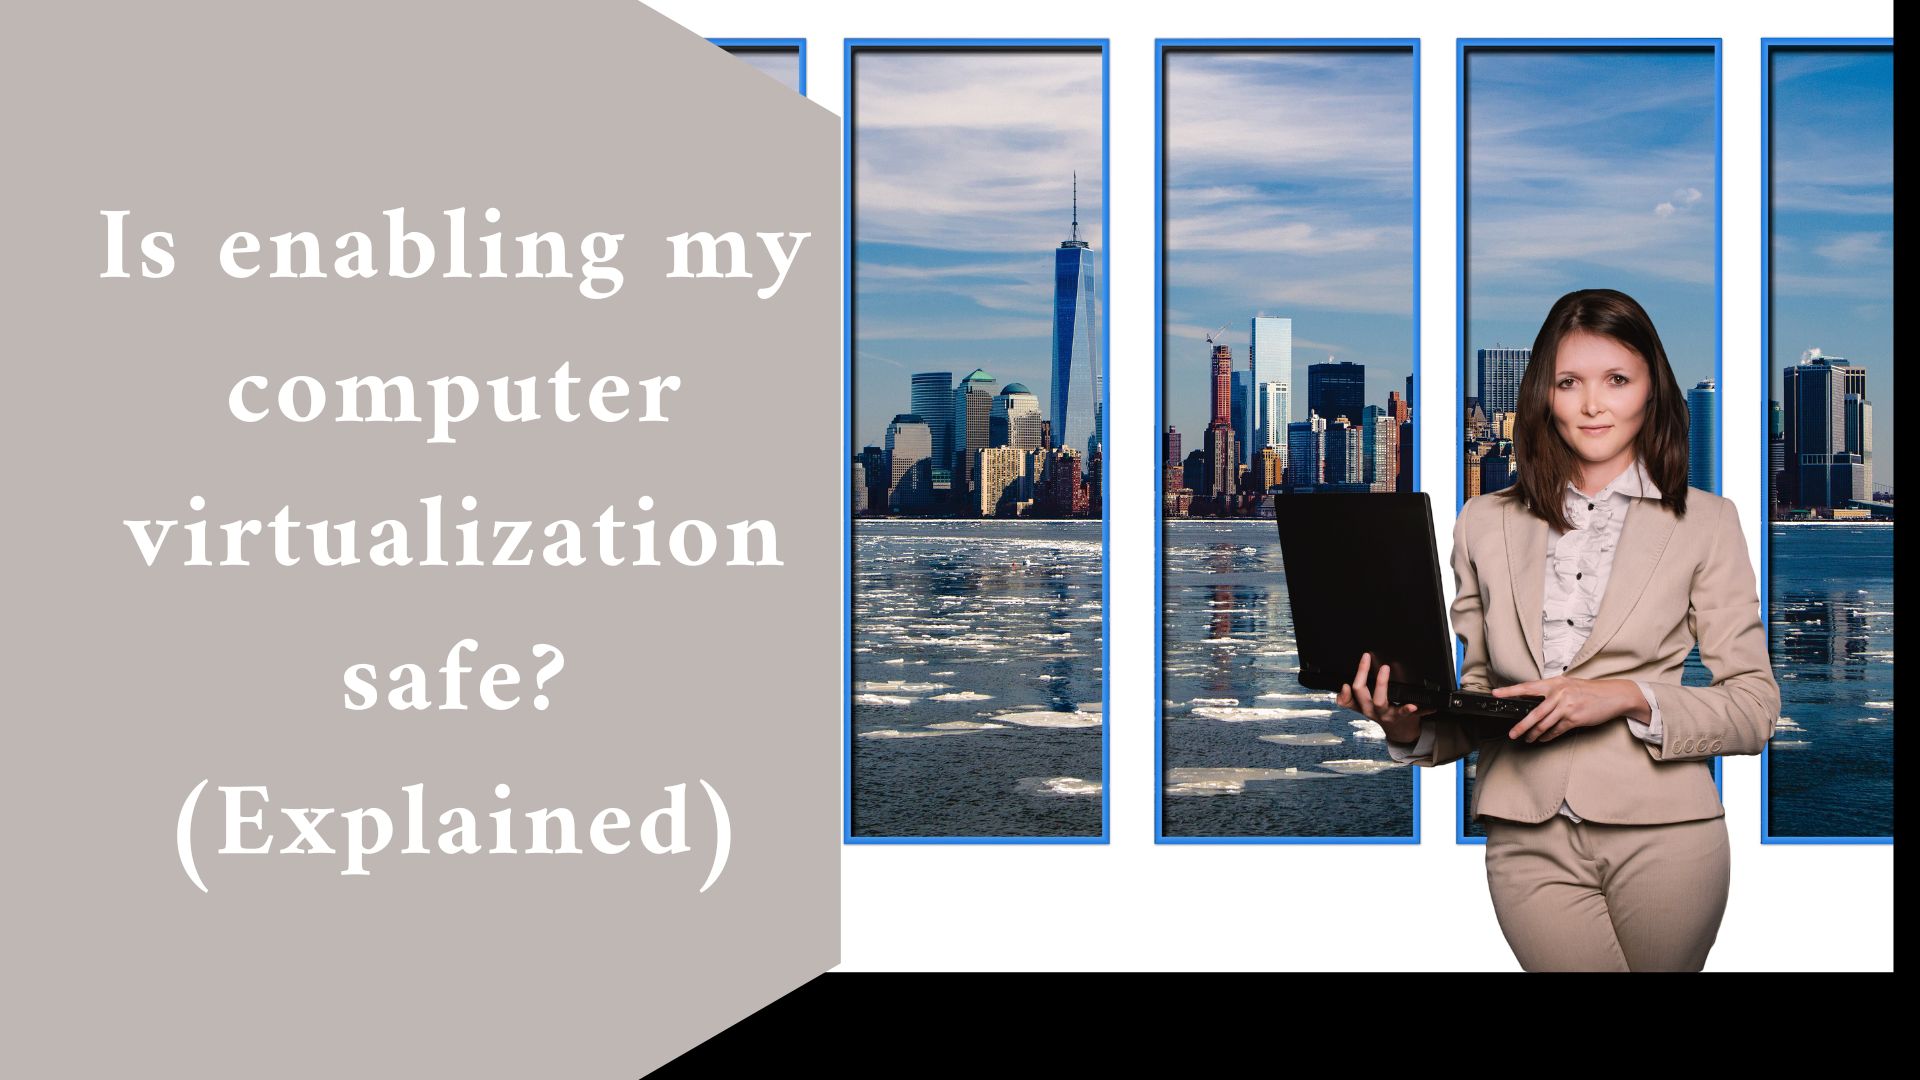 Is enabling my computer virtualization safe? (Explained)